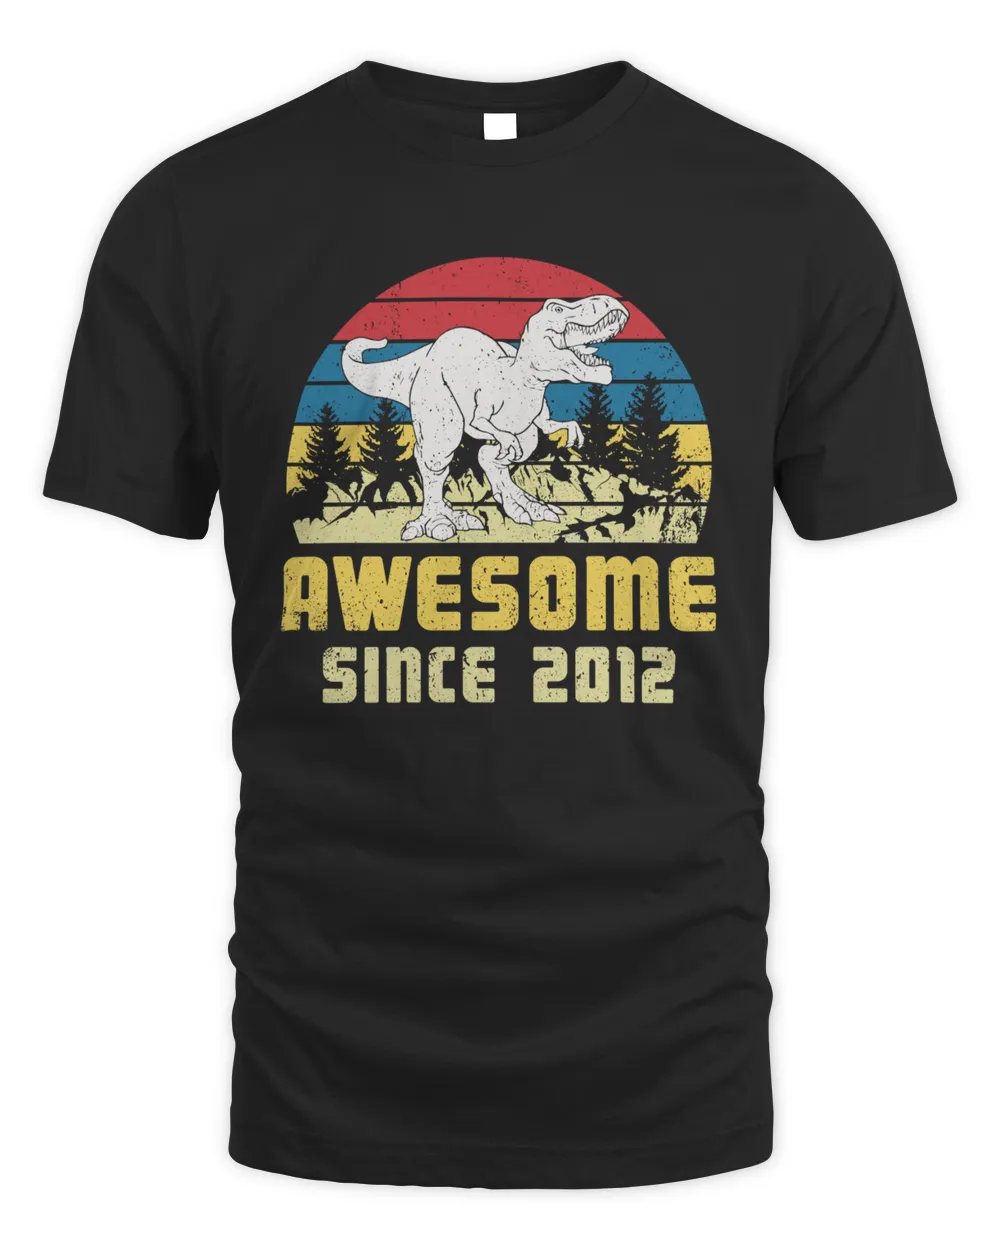 Awesome Since 2012, Born In 2012, Vintage 2012, Birthday Dinosaur, Birthday Gift For Him, Birthday Gift For Her